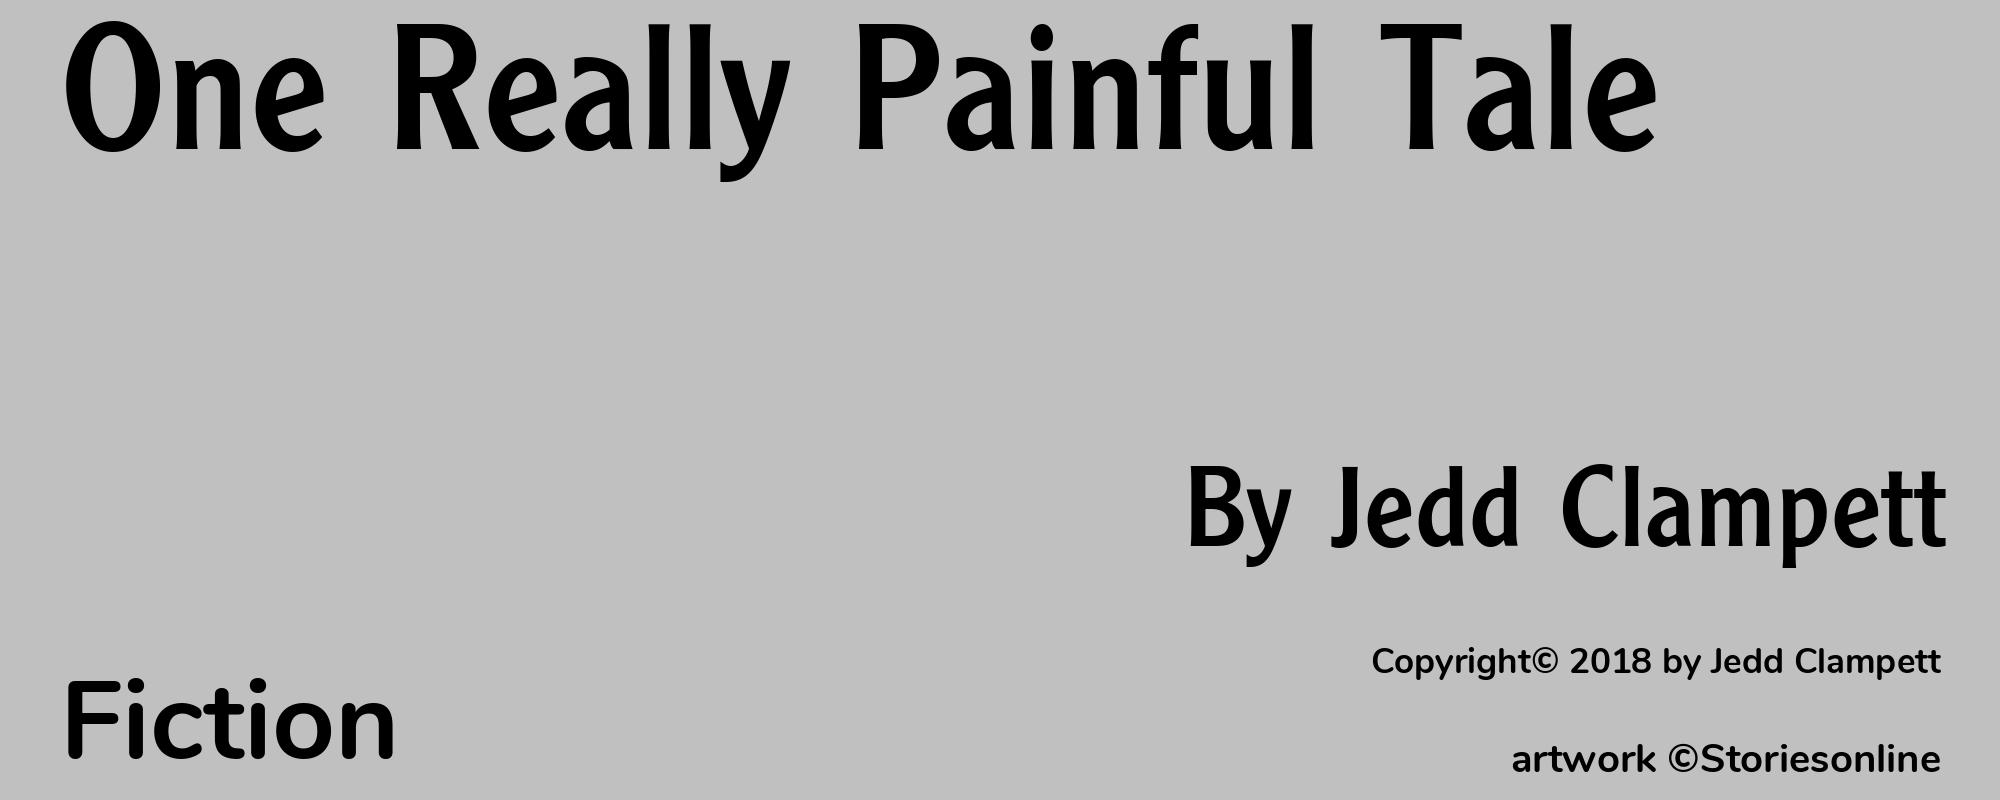 One Really Painful Tale - Cover